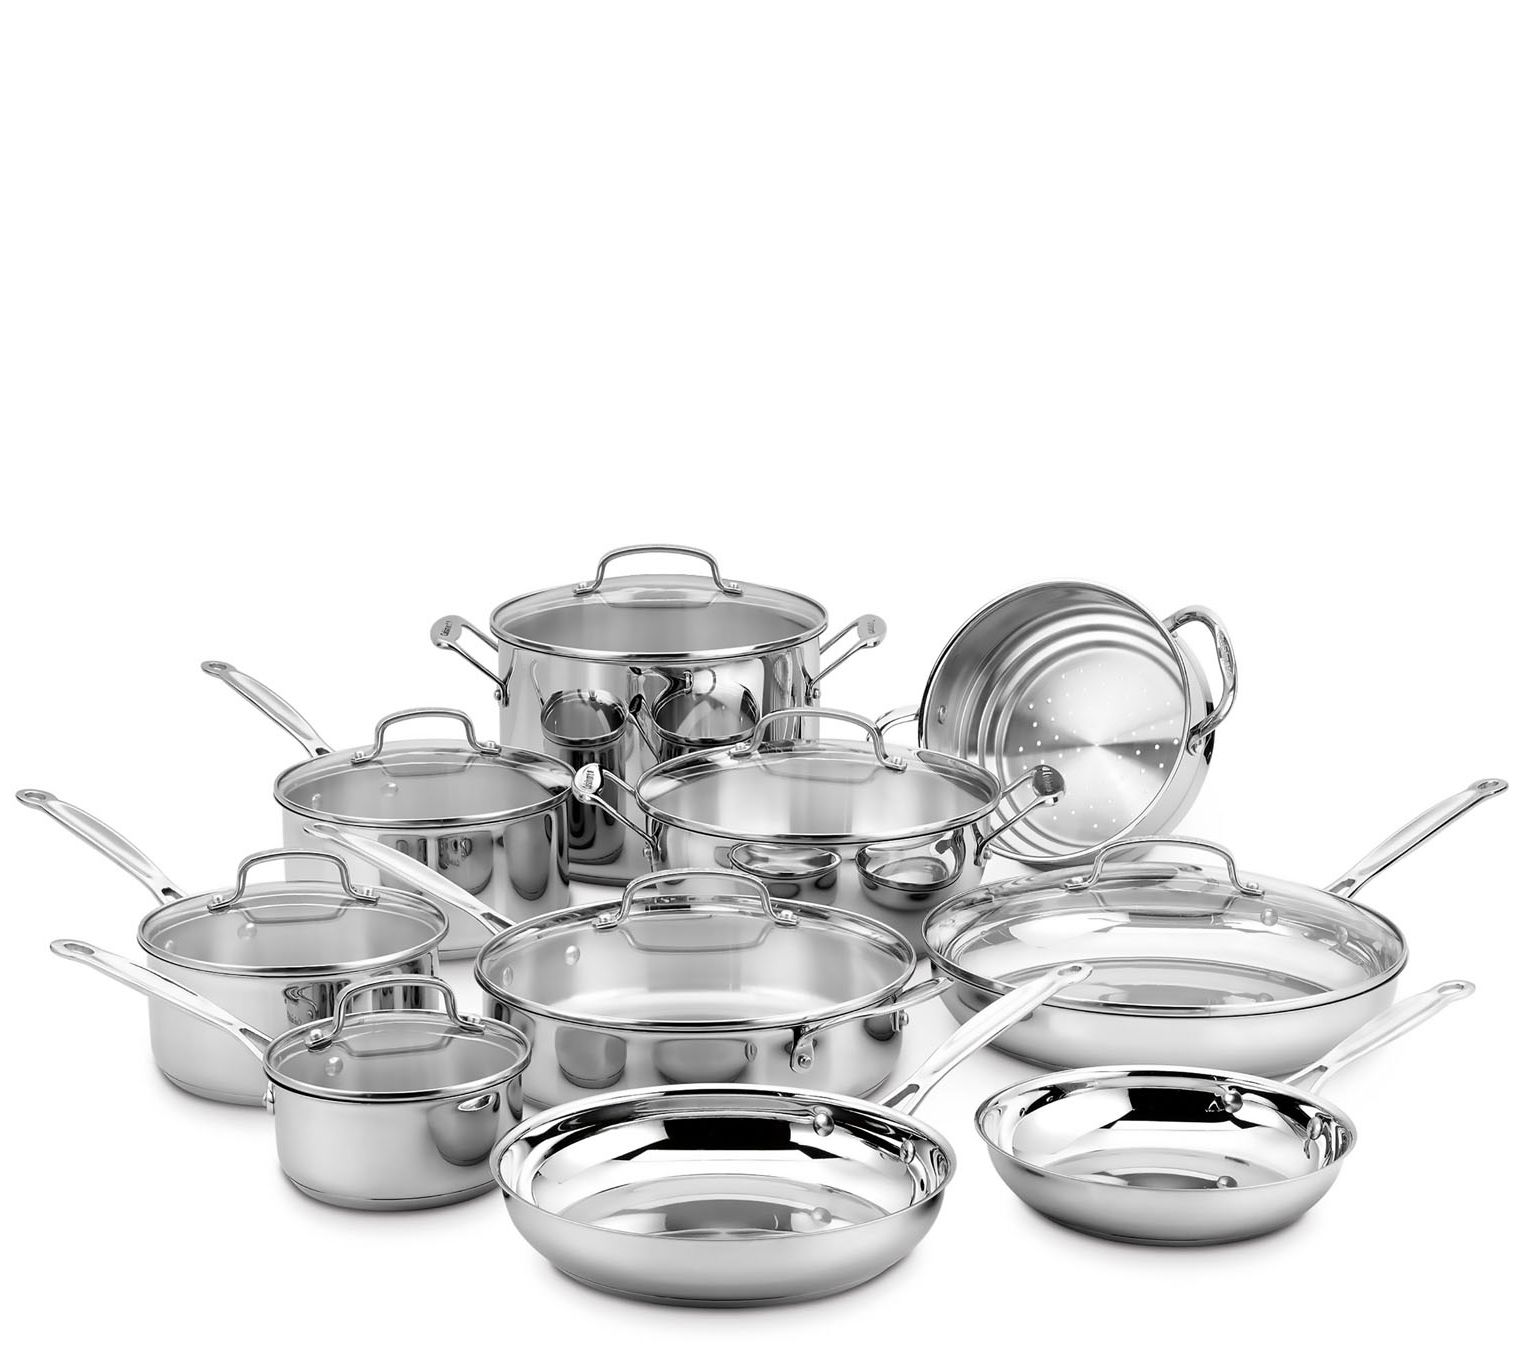 17pc Stainless Steel Cookware Set KT172 